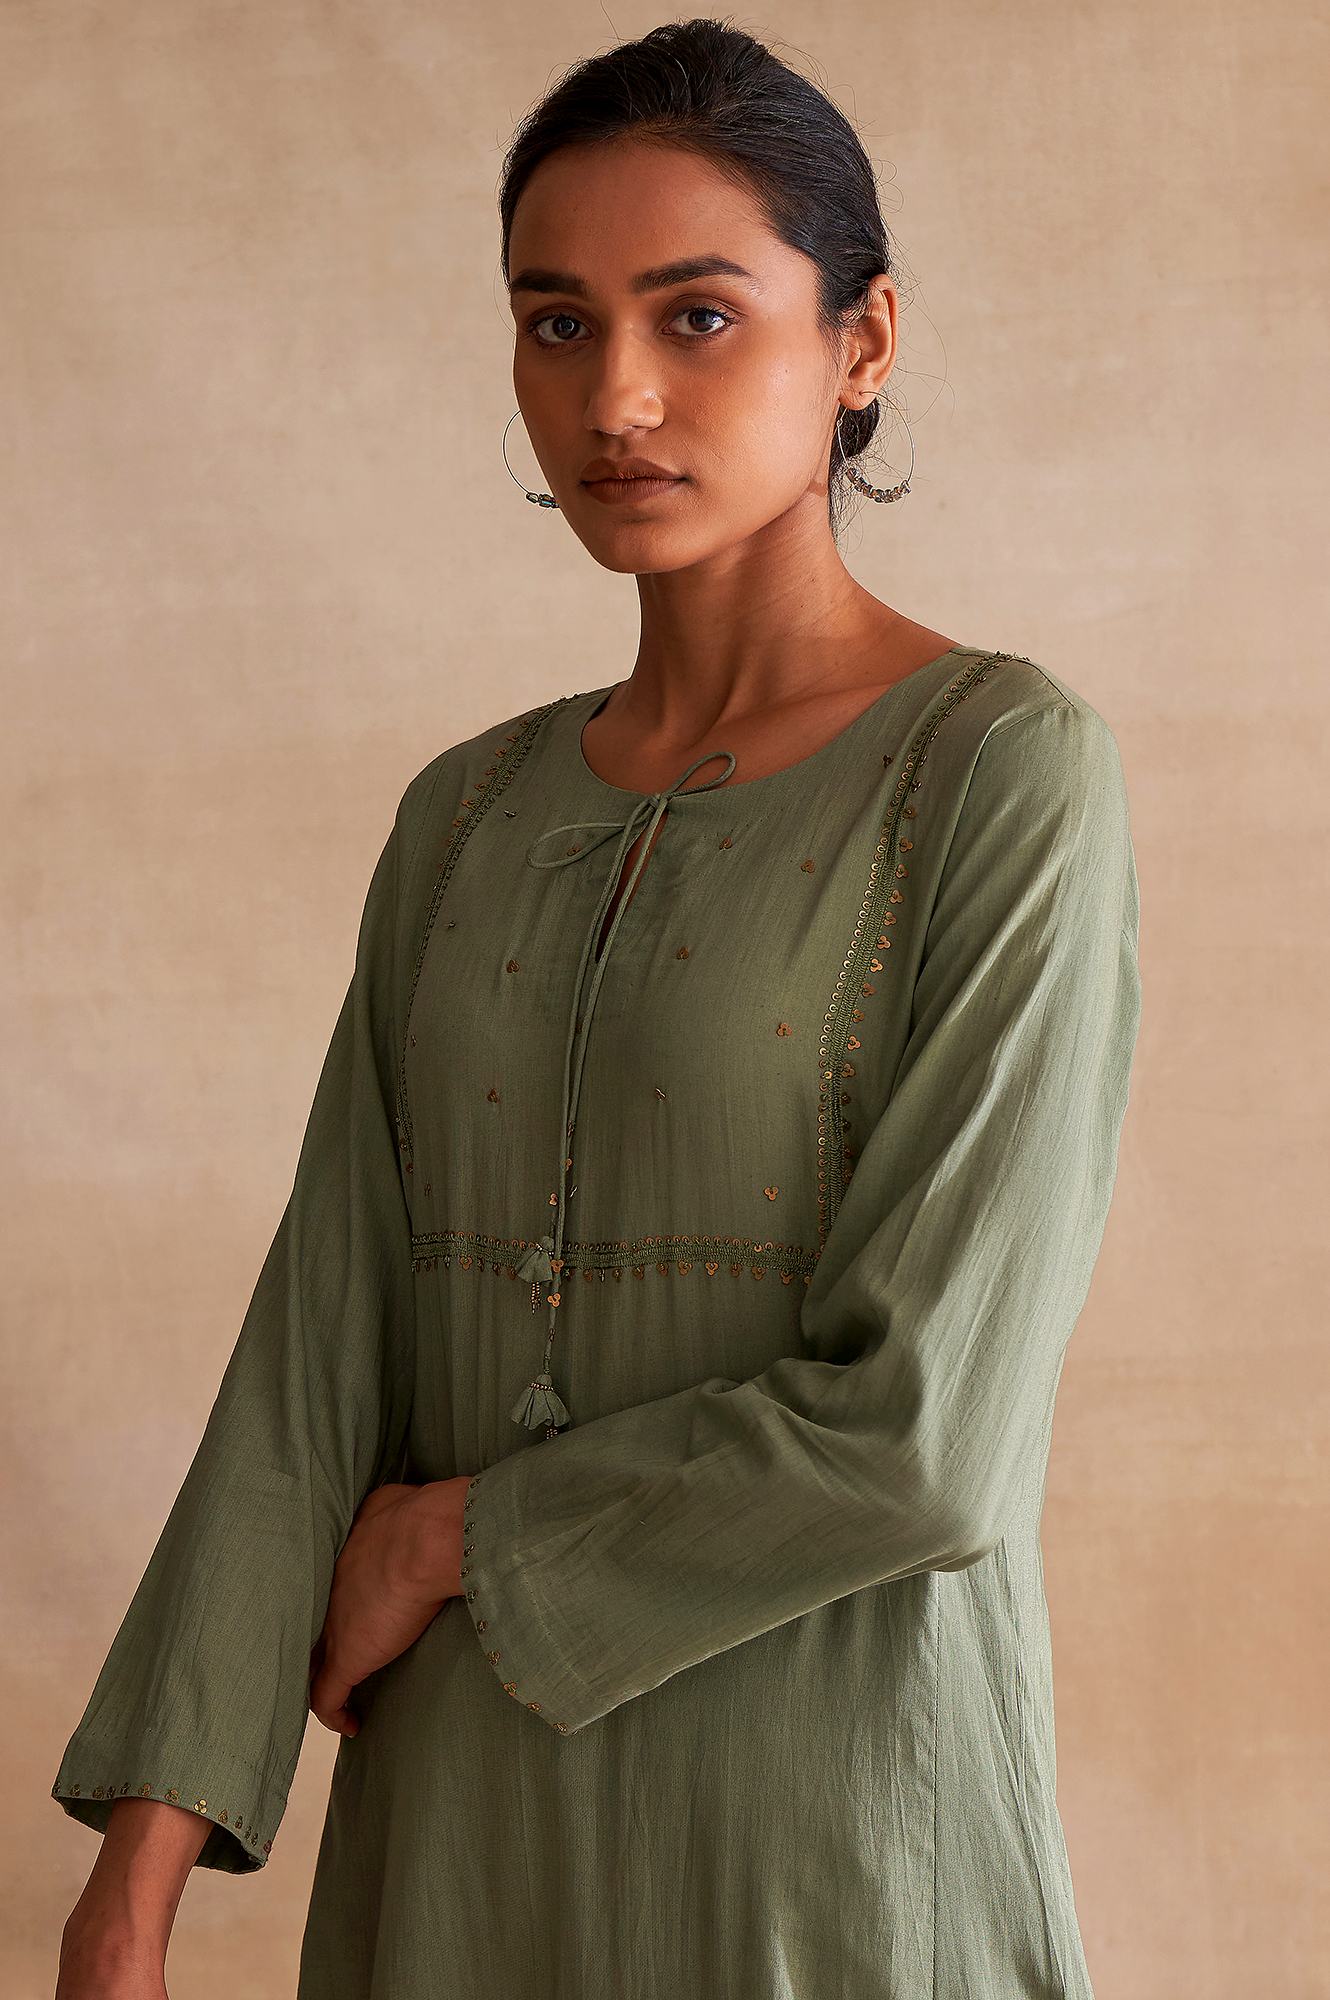 Folksong By W Green Embroidered Cotton kurta